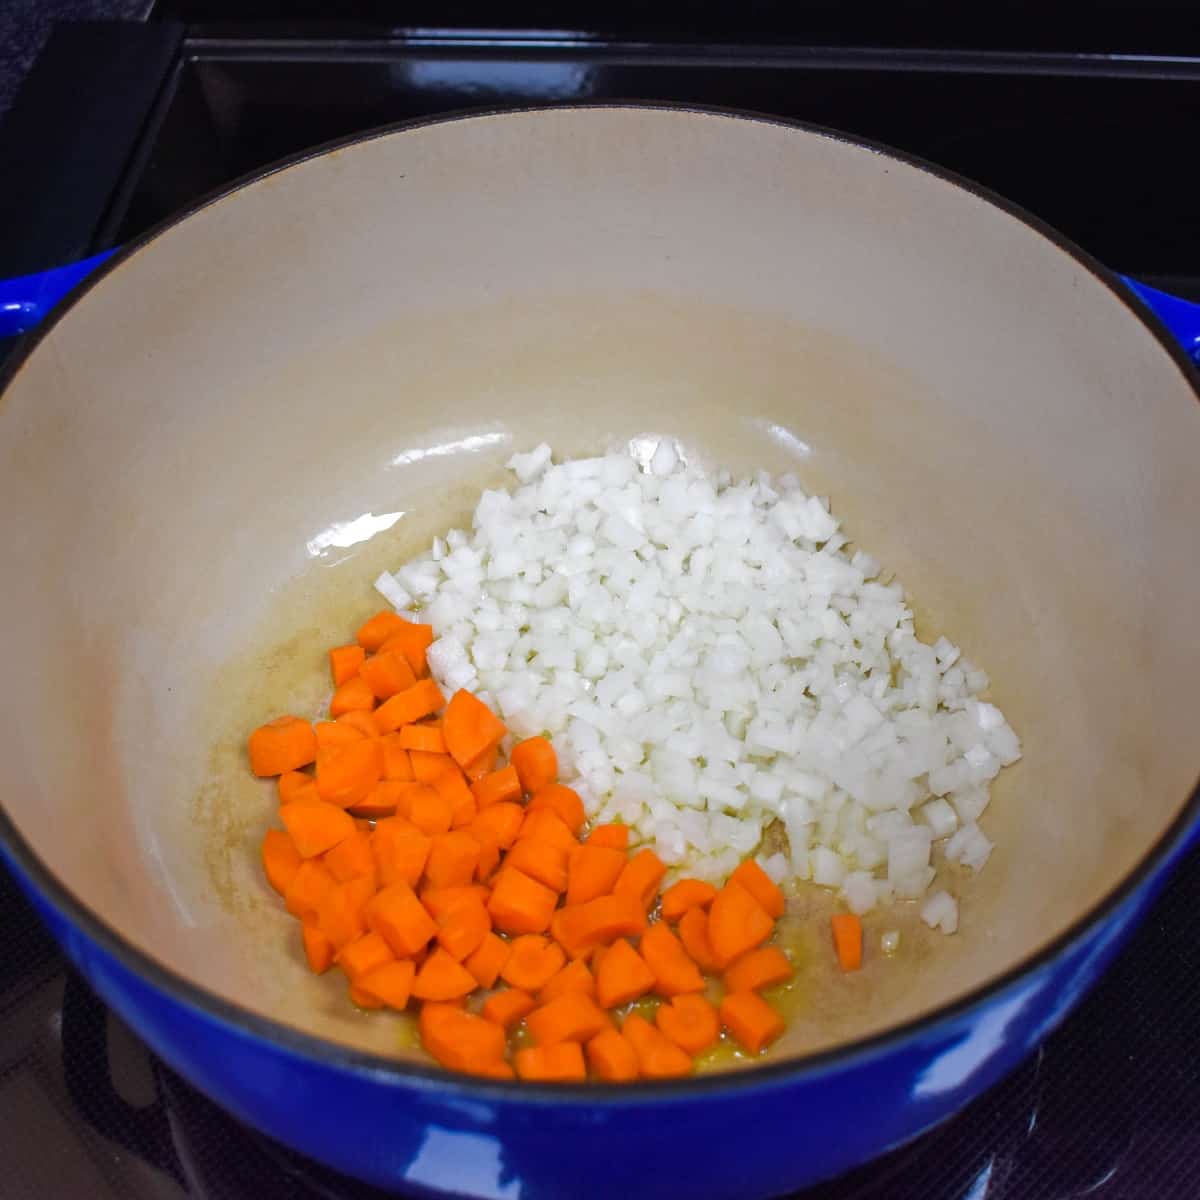 An image of diced onions and carrots in a large blue pot.